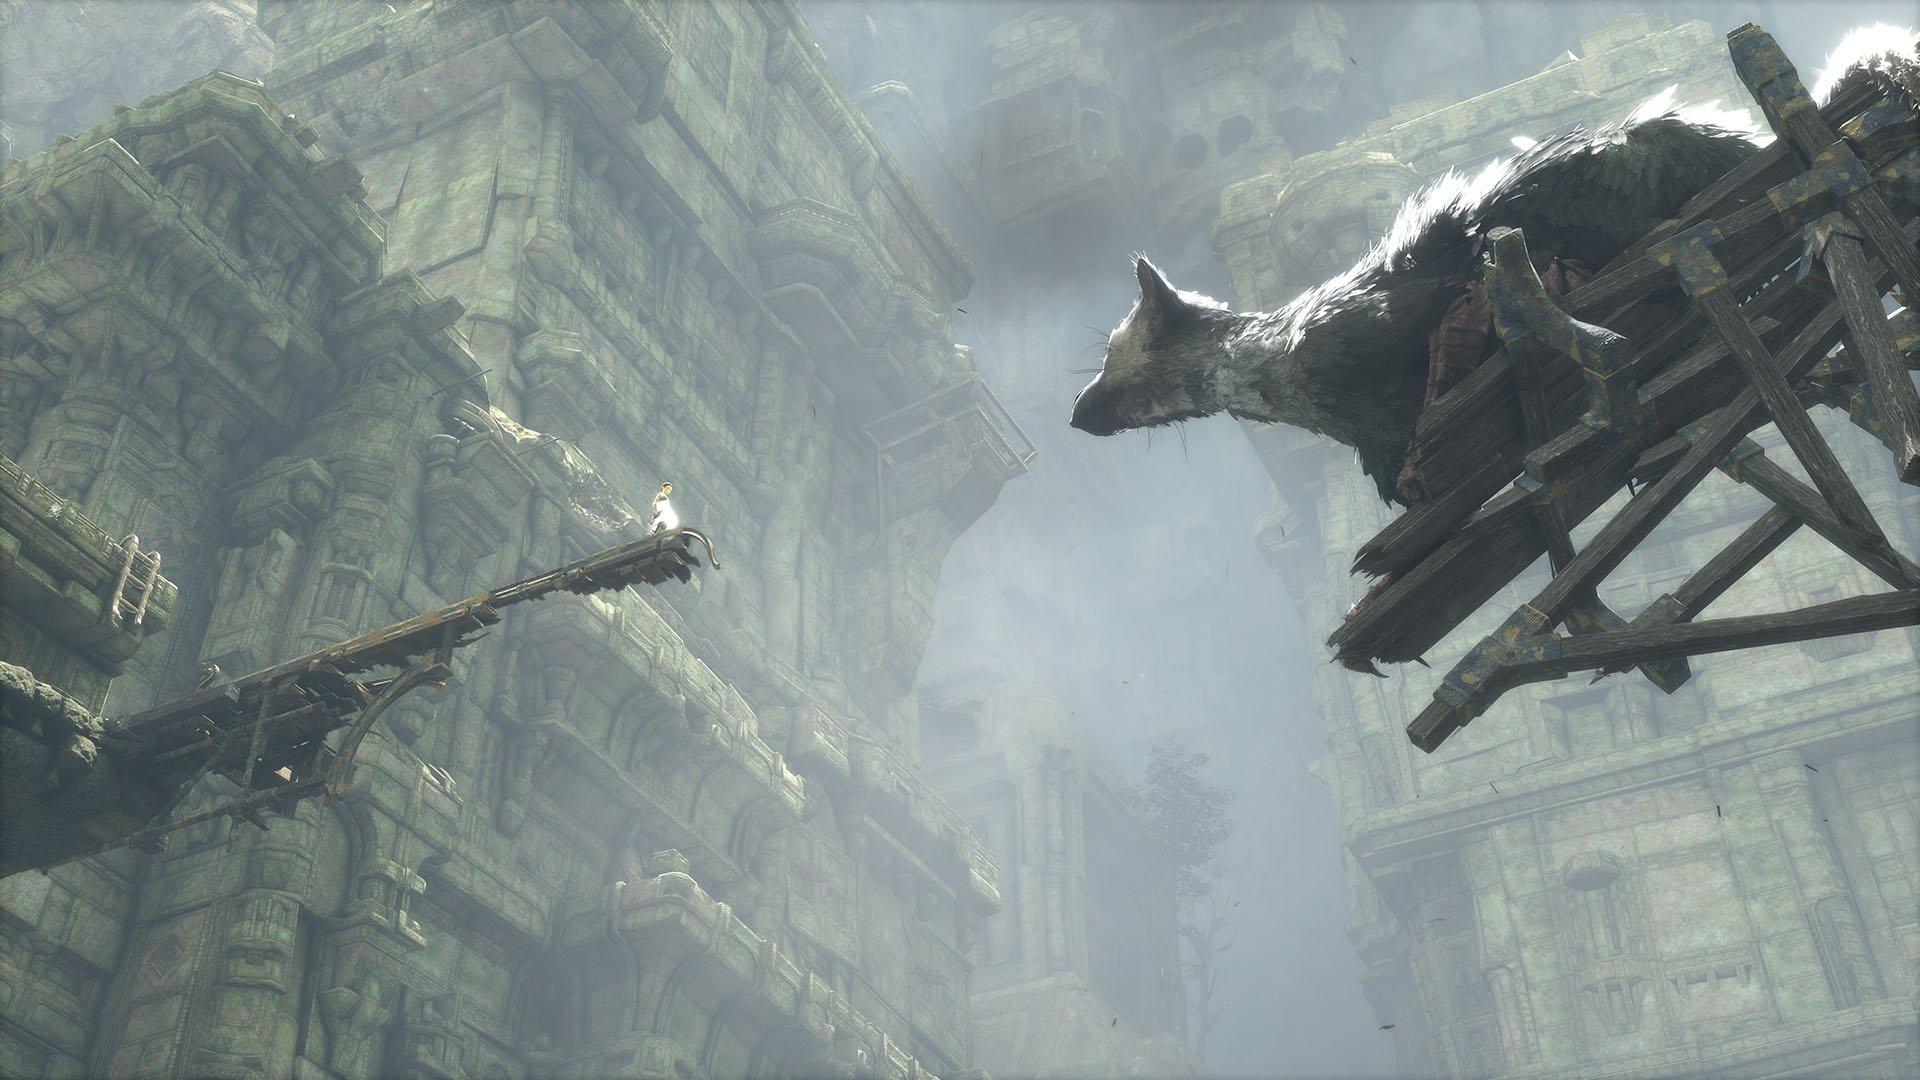 The Last Guardian (Video Game) - TV Tropes